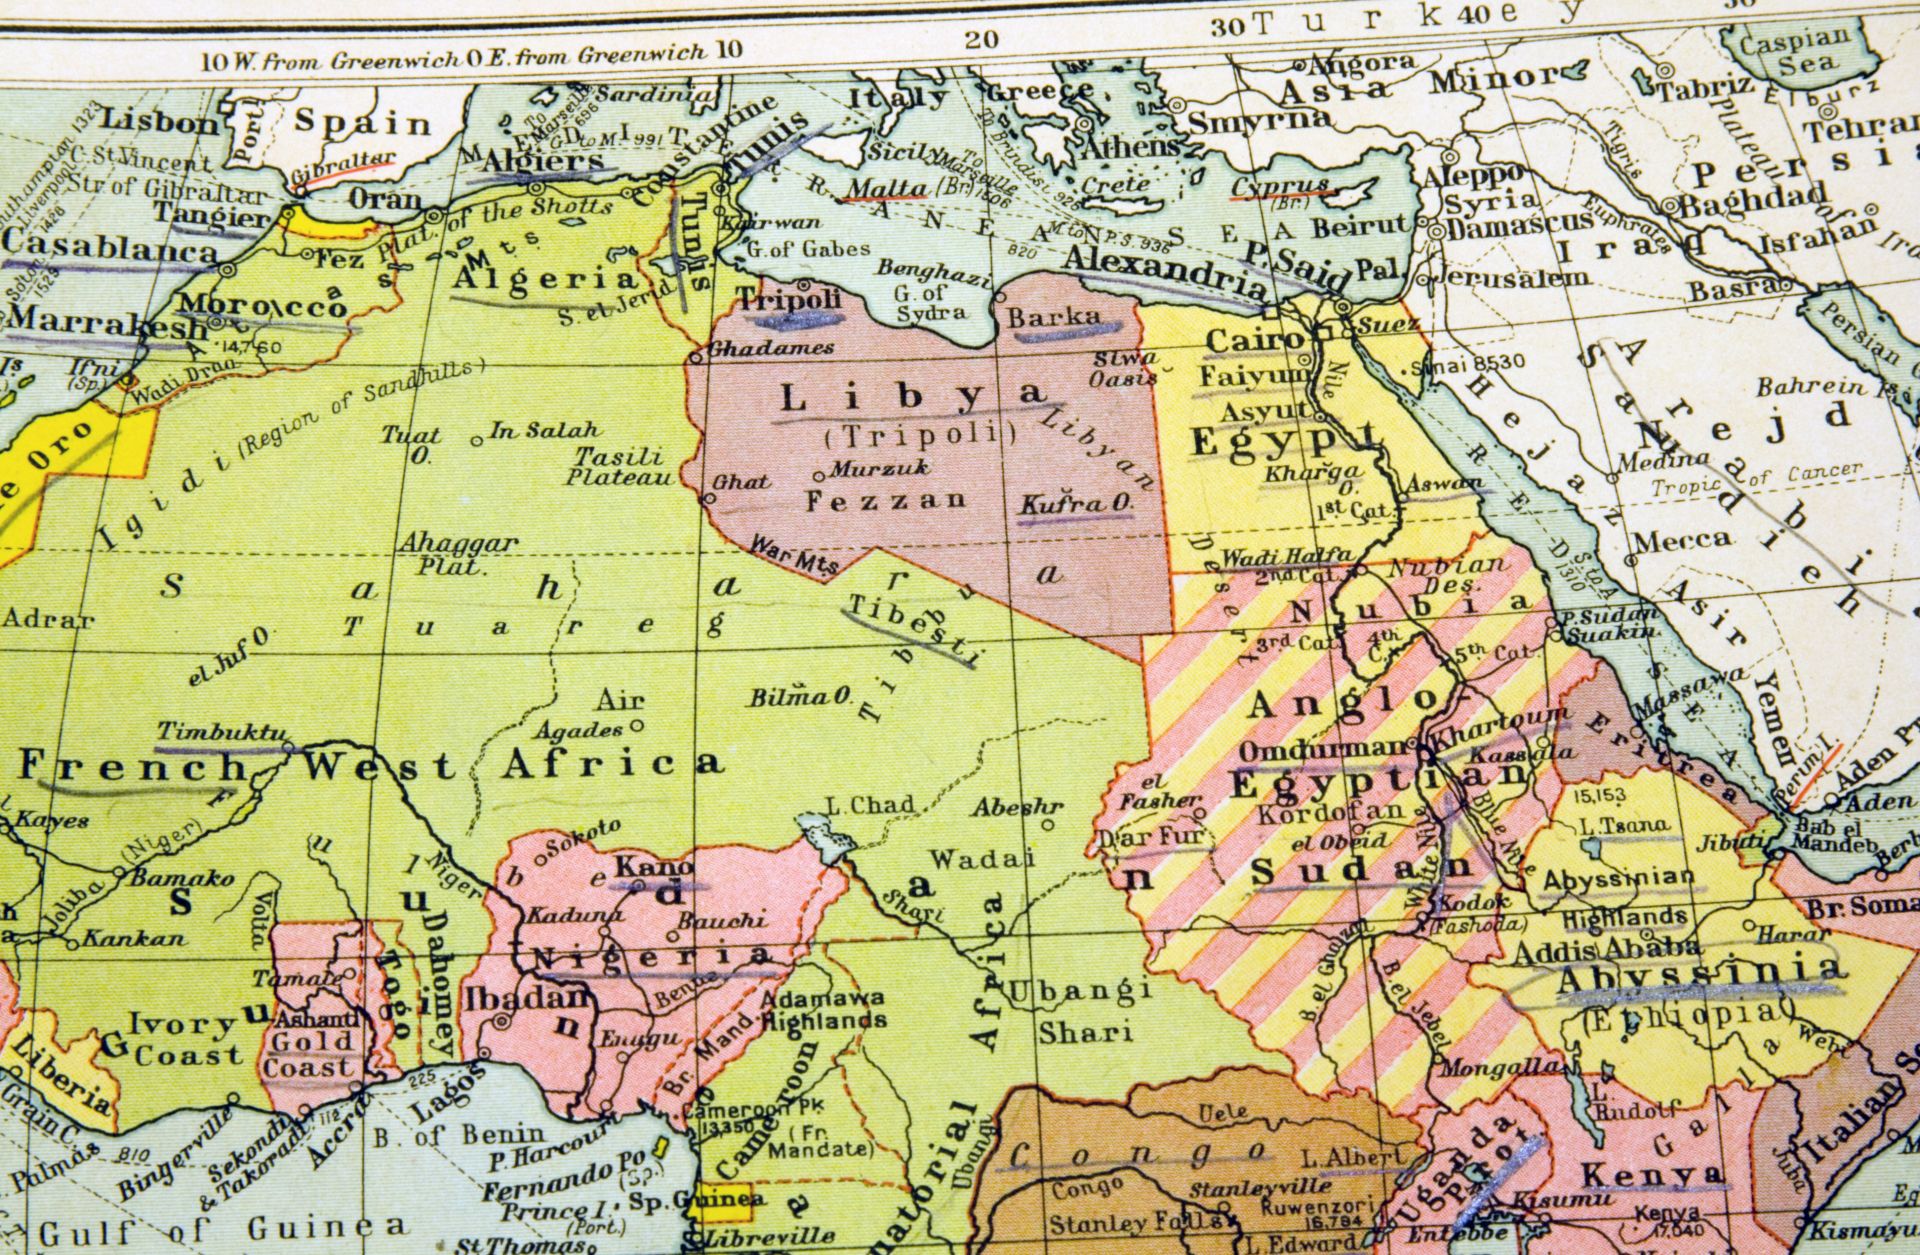 An old map labels African countries and regions by their colonial names.